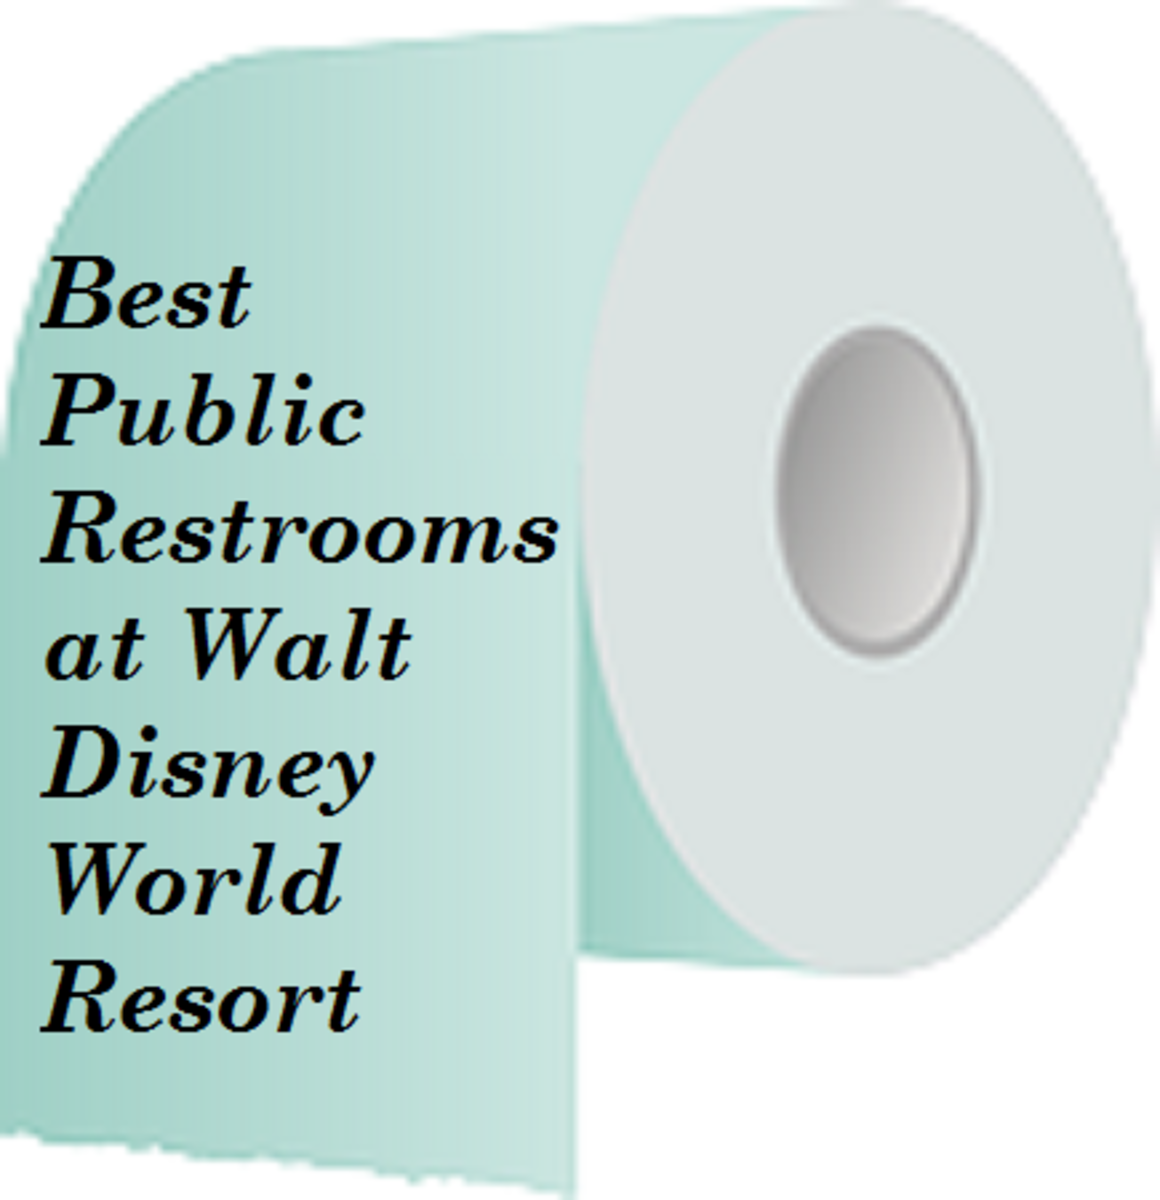 Where are the best restrooms with the shortest lines at Walt Disney World?